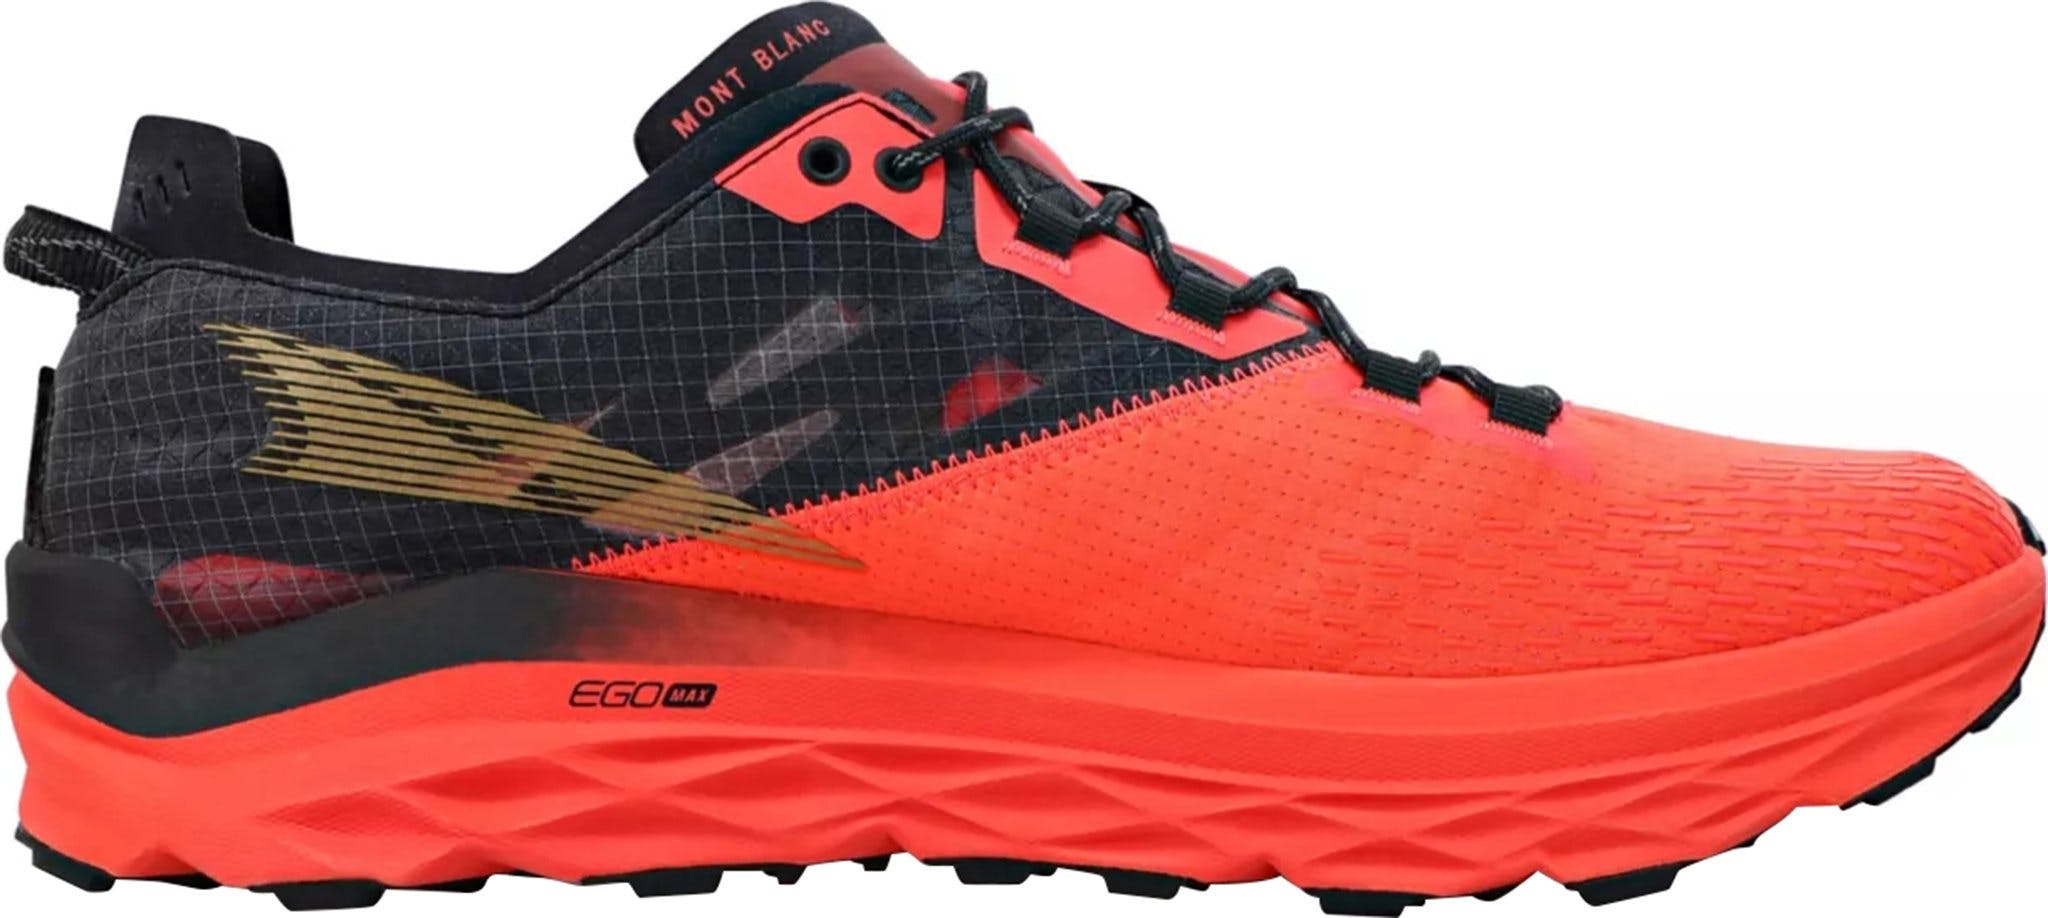 Product image for Mont Blanc Trail Running Shoes - Women's